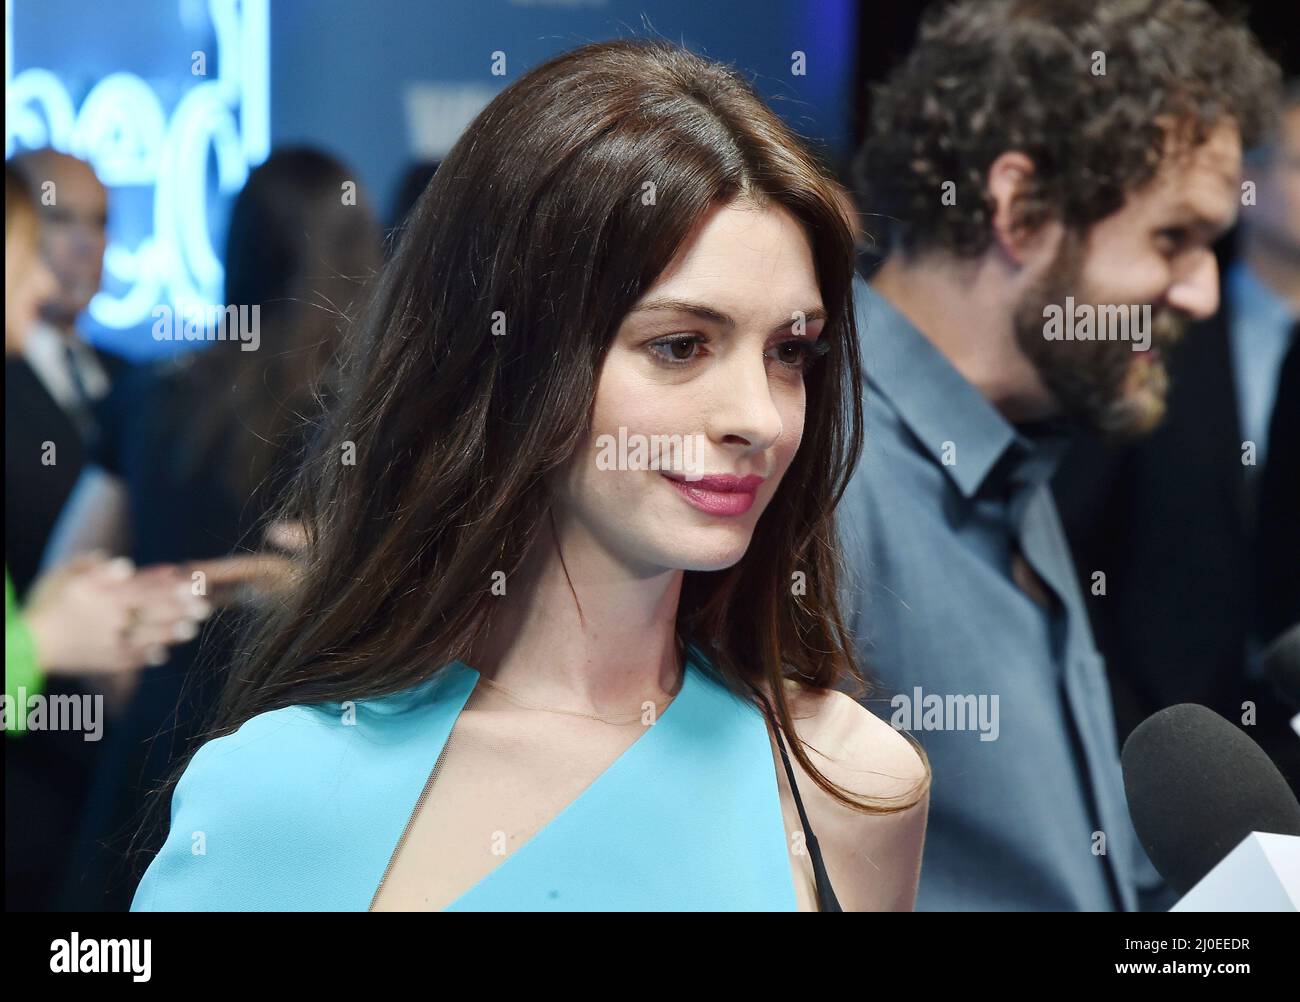 Los Angeles, CA. 17th Mar 2022. Anne Hathaway partecipa alla prima mondiale del 'WeCrashed' di Apple TV all'Academy Museum of Motion Pictures il 17 marzo 2022 a Los Angeles, California. Credit: Jeffrey Mayer/JTM Photos/Media Punch/Alamy Live News Foto Stock